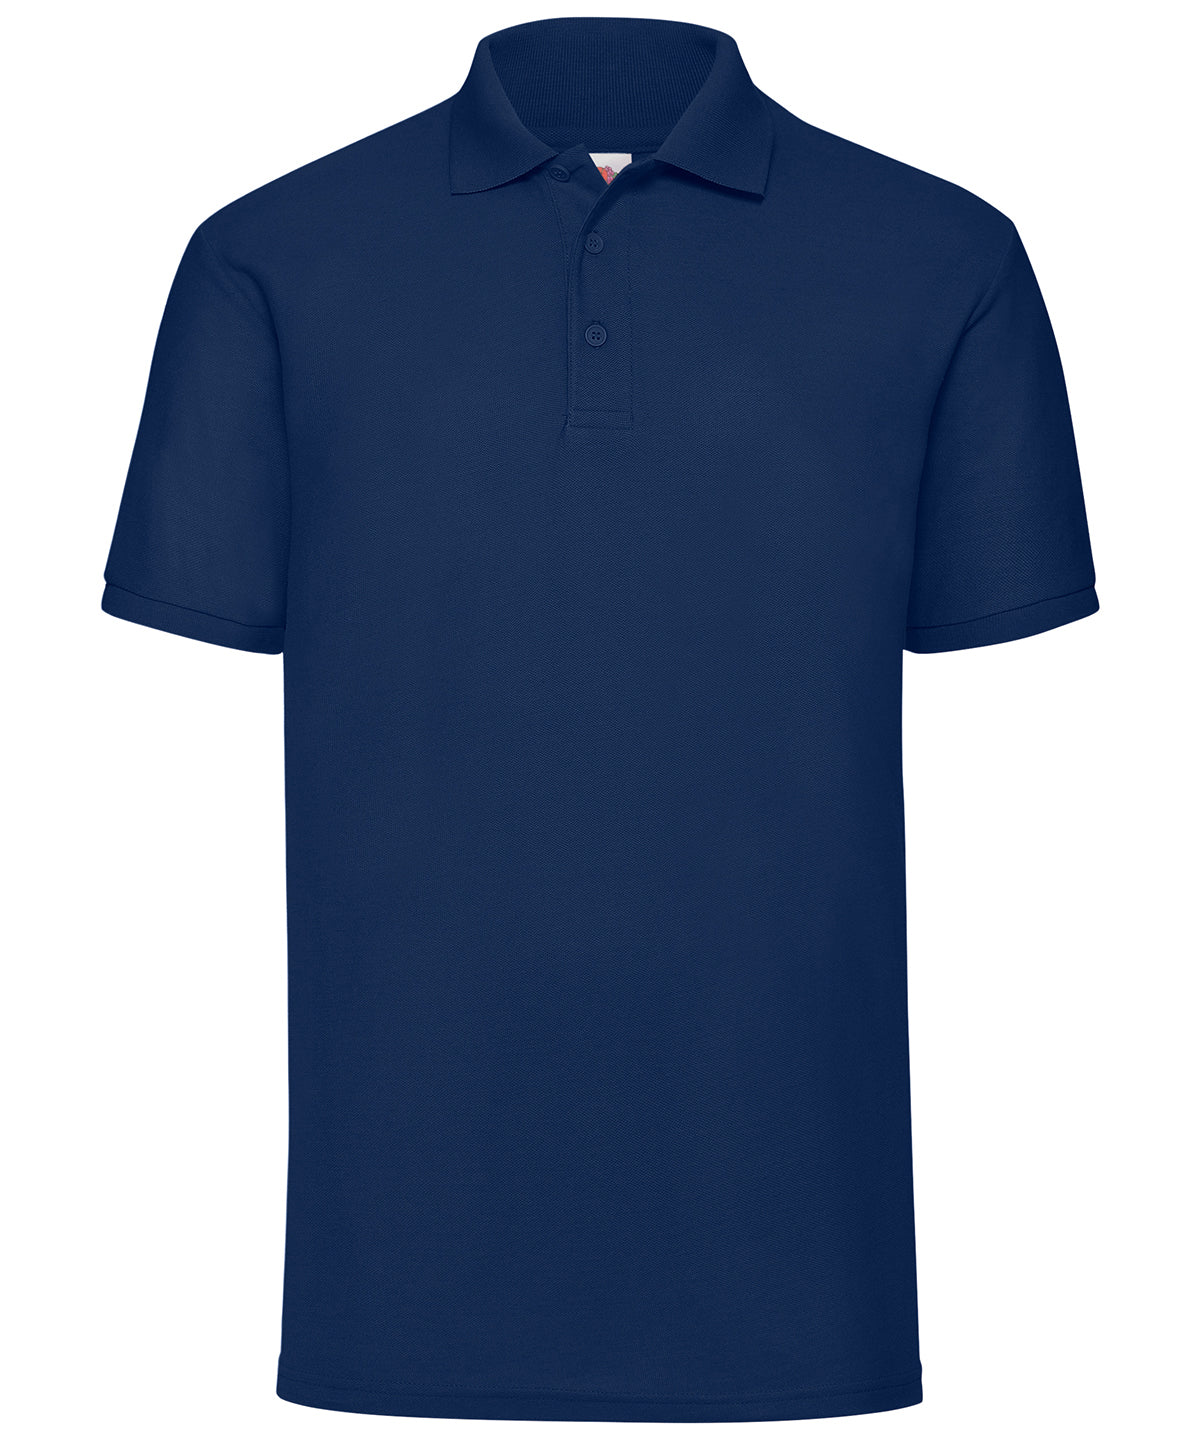 Fruit of the Loom 65/35 Polo Navy